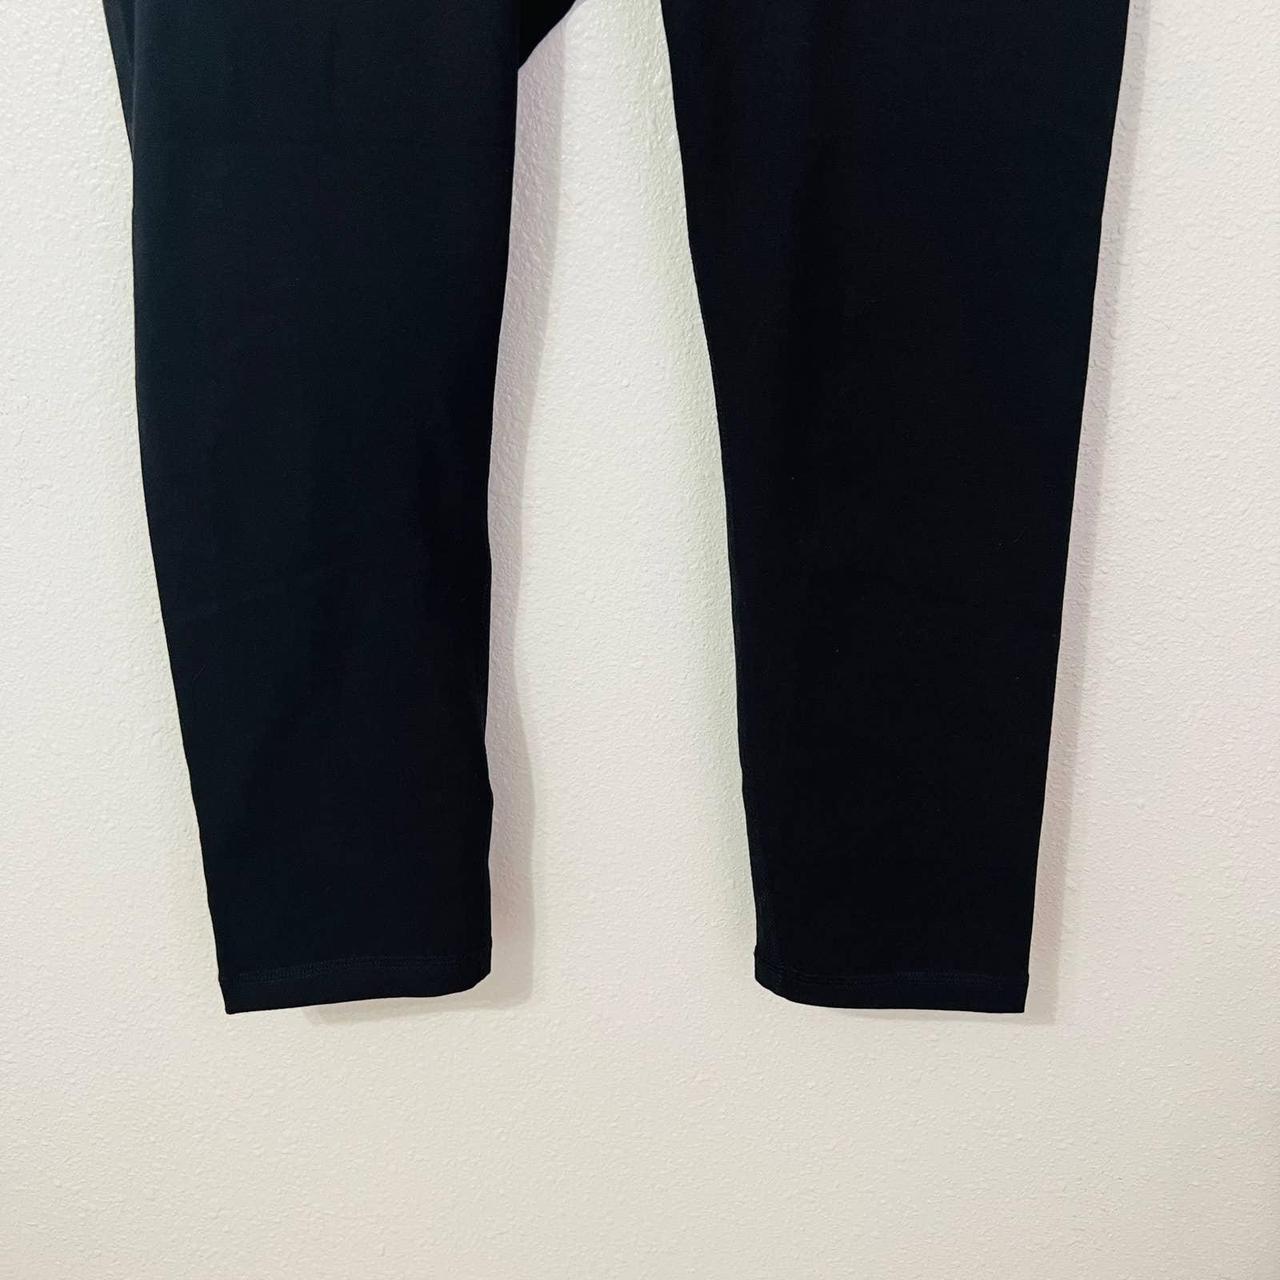 NWT Juicy Couture Sport Leggings. Partially high - Depop